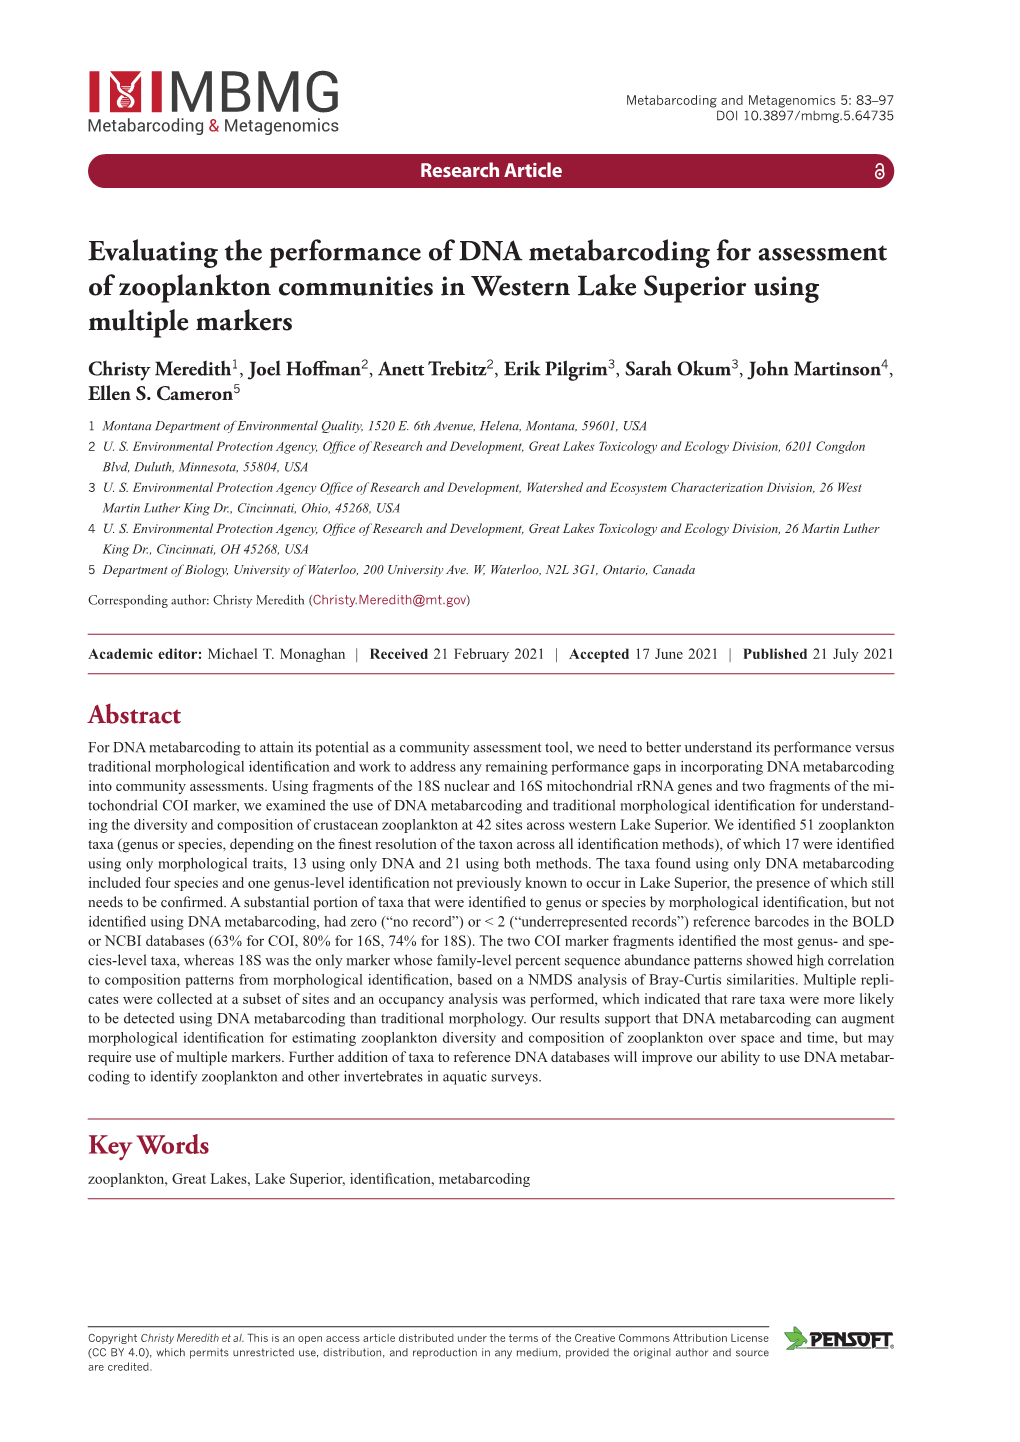 ﻿Evaluating the Performance of DNA Metabarcoding for Assessment Of